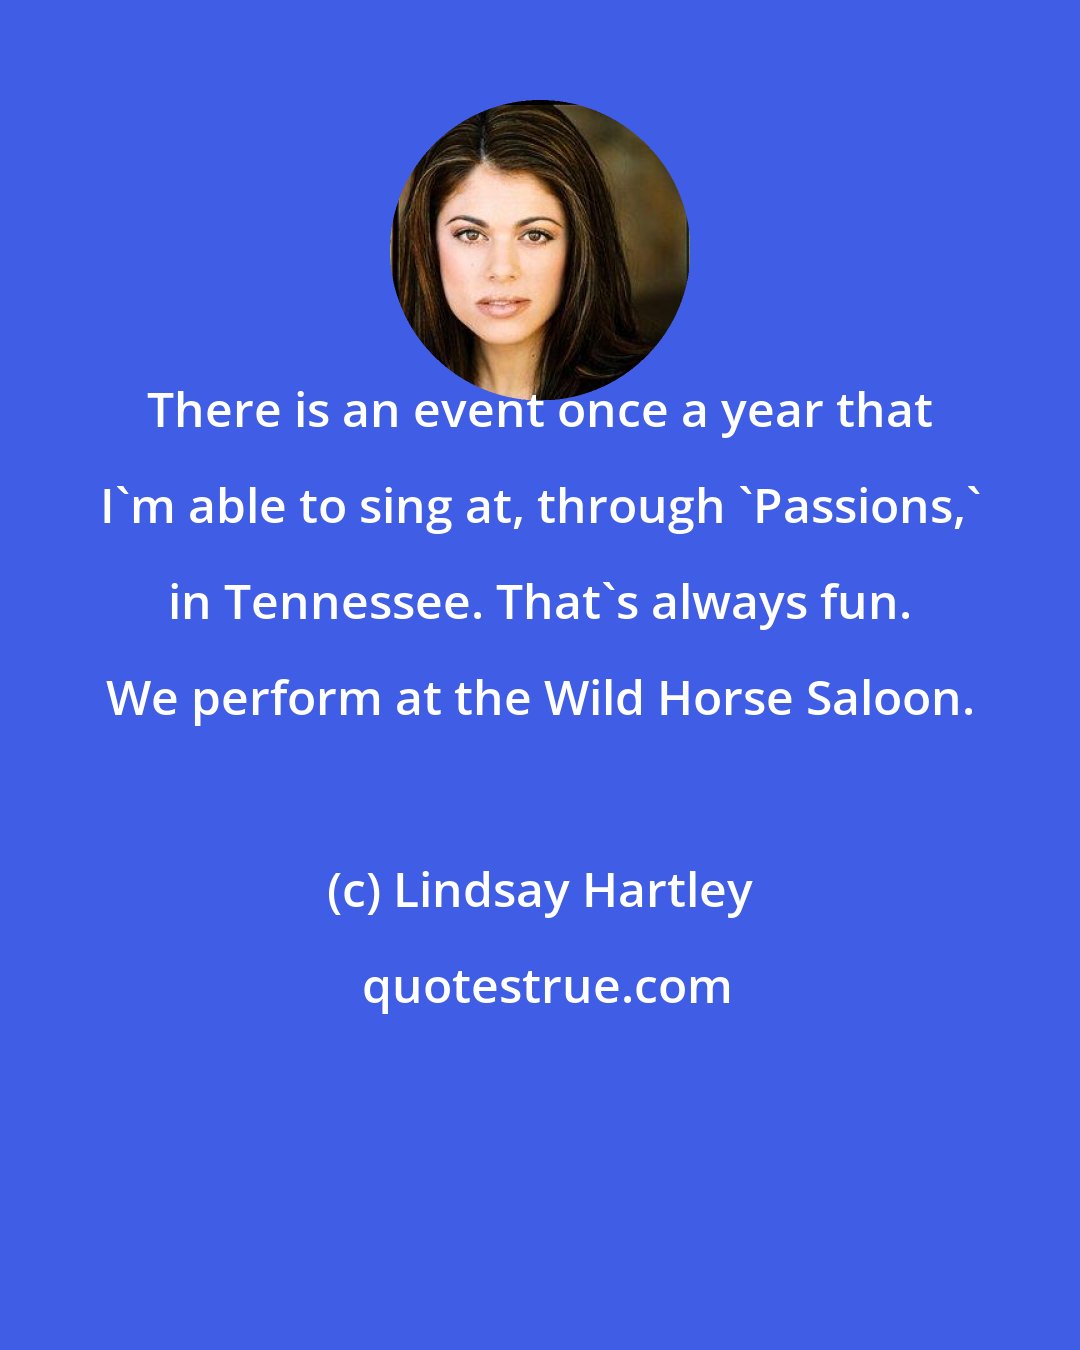 Lindsay Hartley: There is an event once a year that I'm able to sing at, through 'Passions,' in Tennessee. That's always fun. We perform at the Wild Horse Saloon.